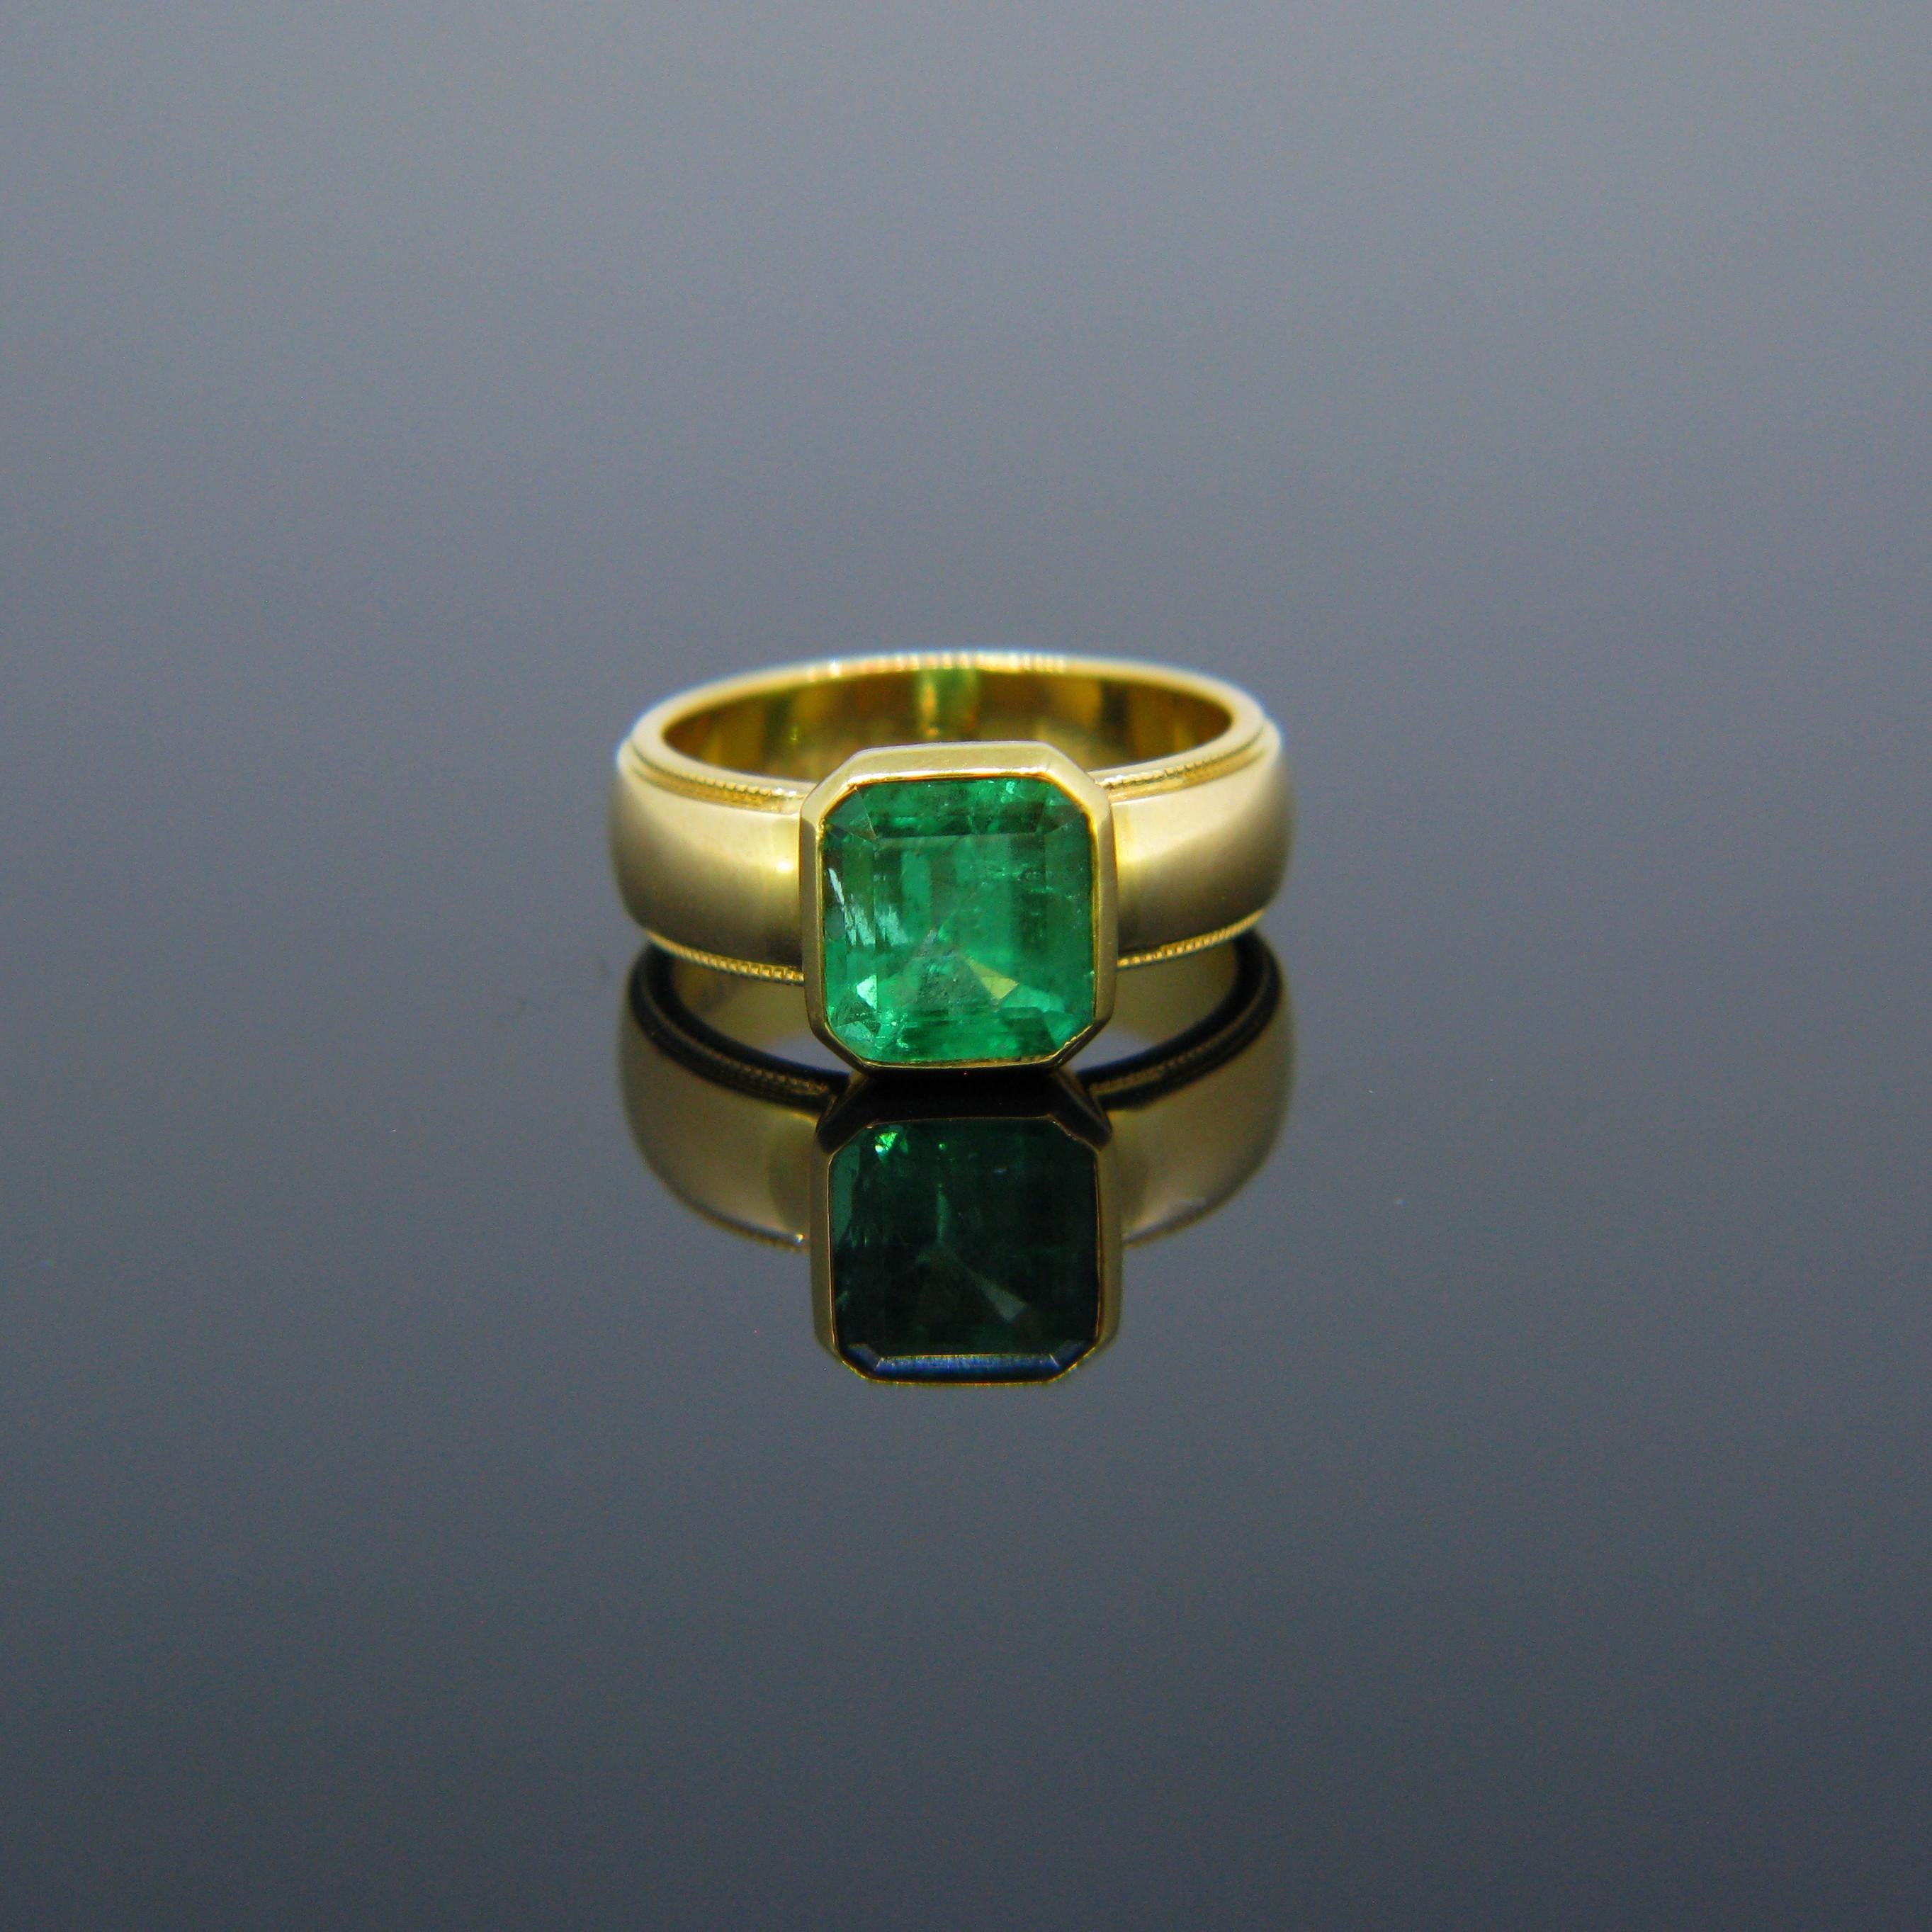 This ring is made in 18kt yellow gold. It is set with a beautiful emerald from Colombia, it weighs around 2.70ct. The gold is smooth and shiny. It is in excellent condition. The ring is signed inside by the famous American jeweller TIFFANY&CO. It is